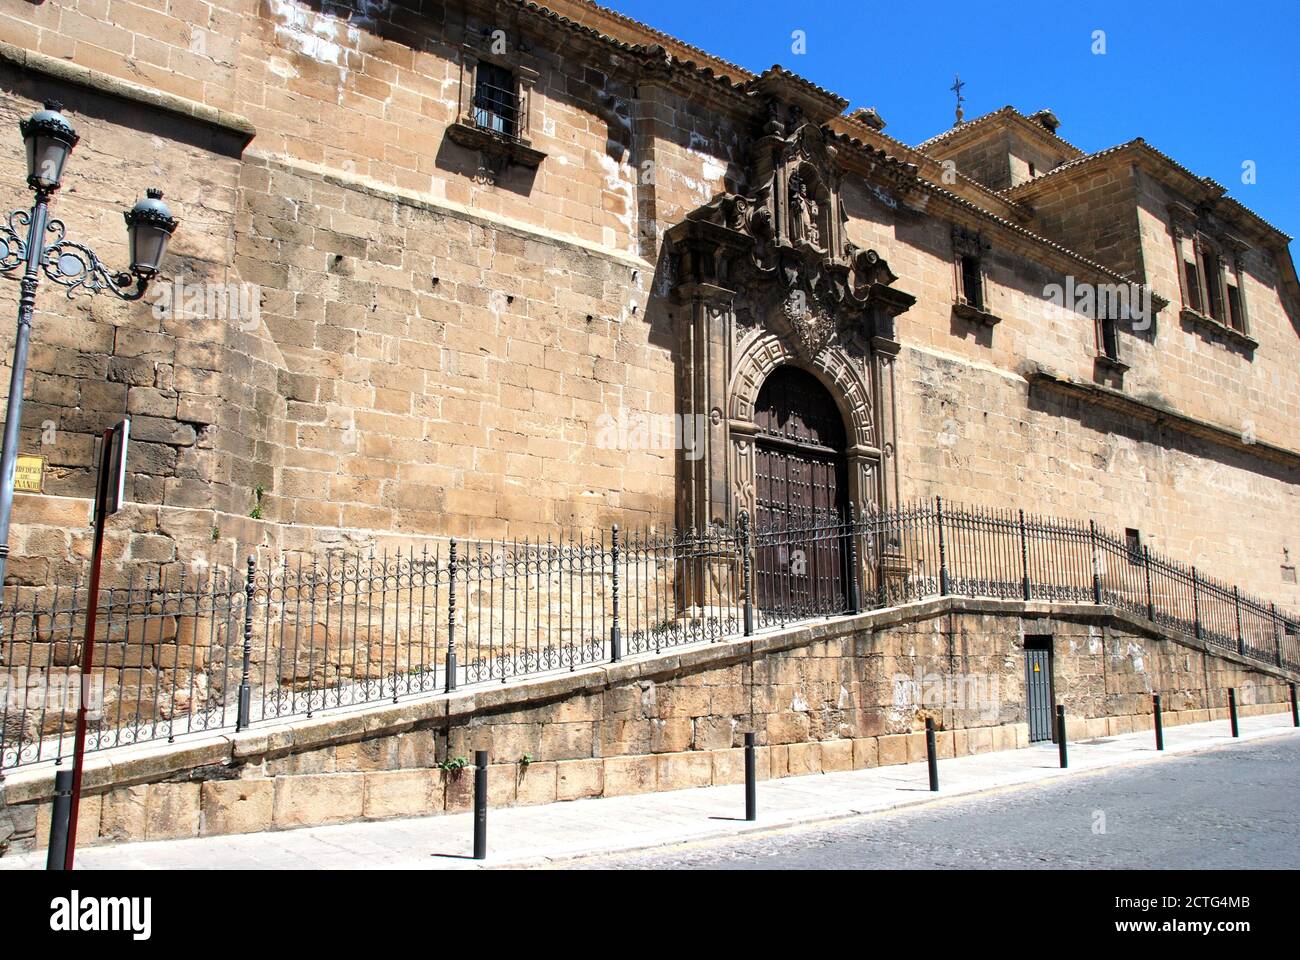 View of the Holy Trinity church and convent, Ubeda, Spain. Stock Photo